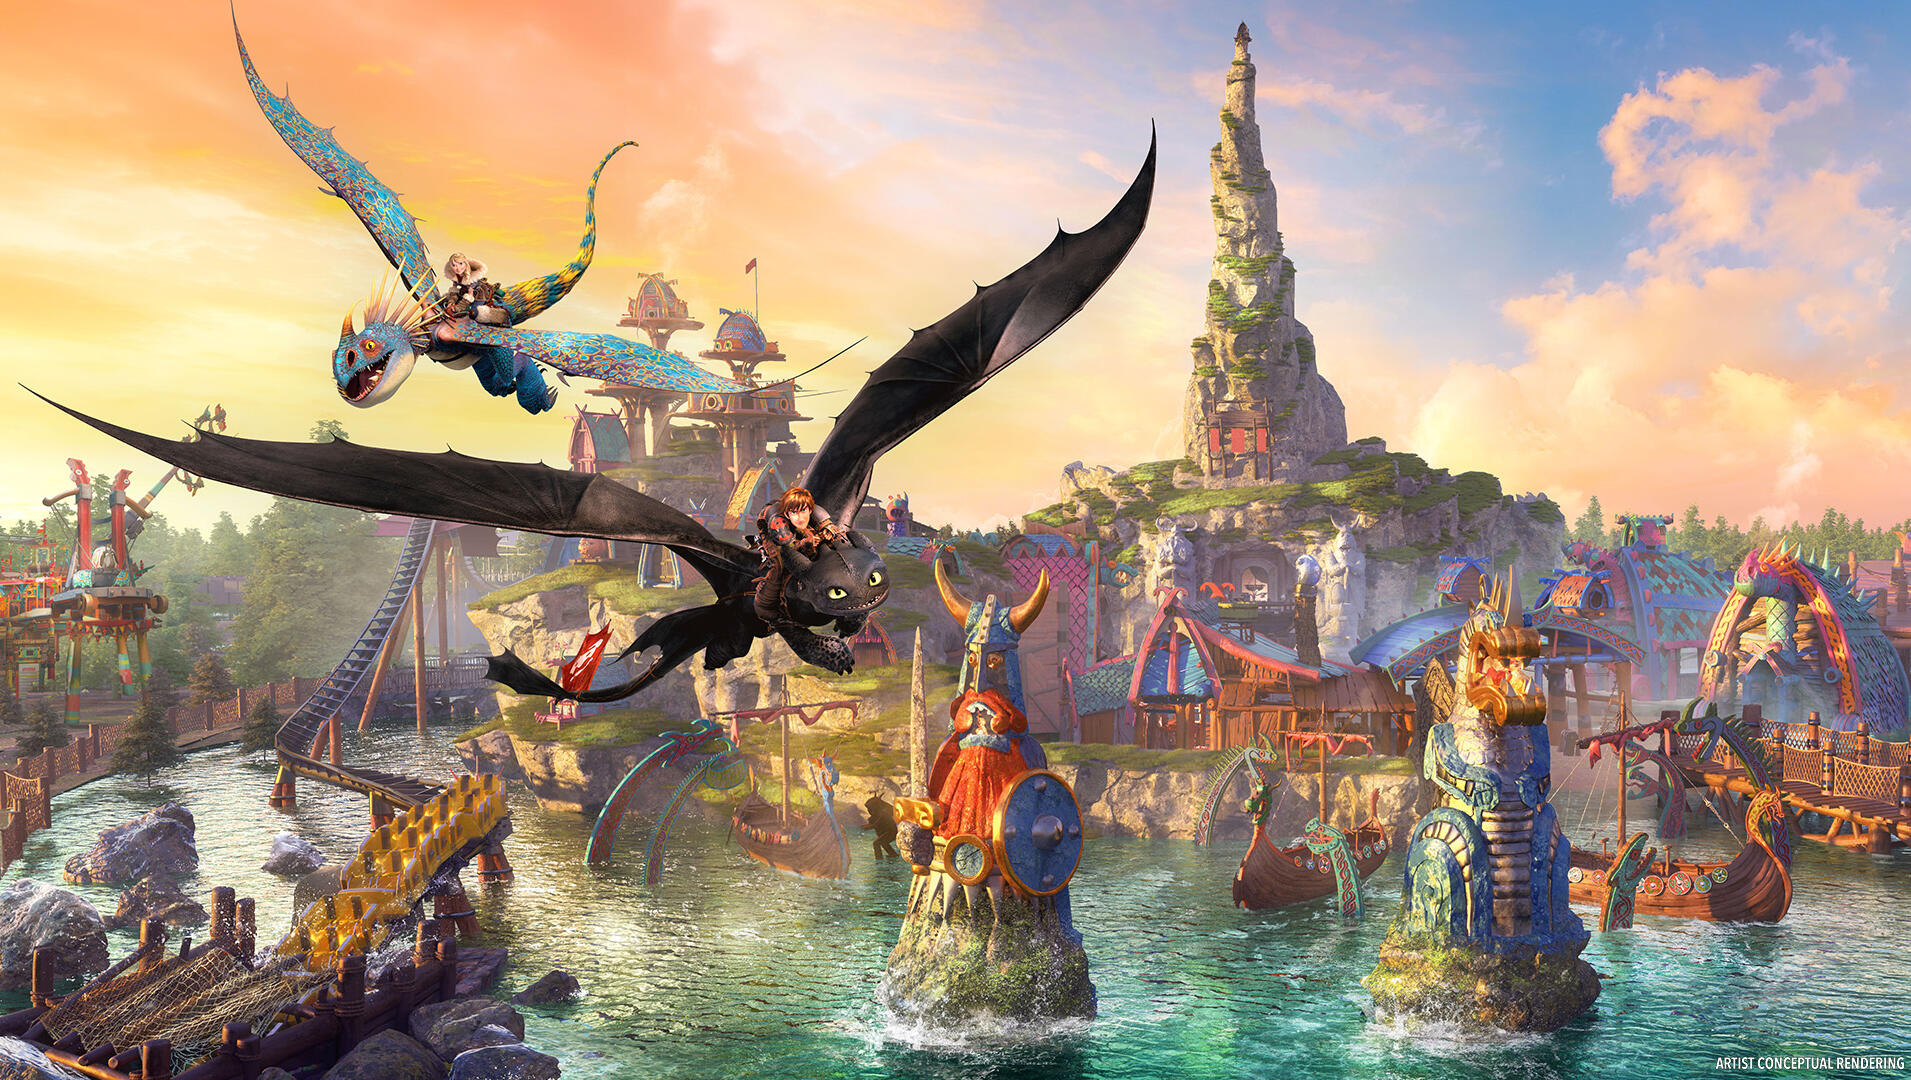 New Details Revealed For How to Train Your Dragon – Isle of Berk